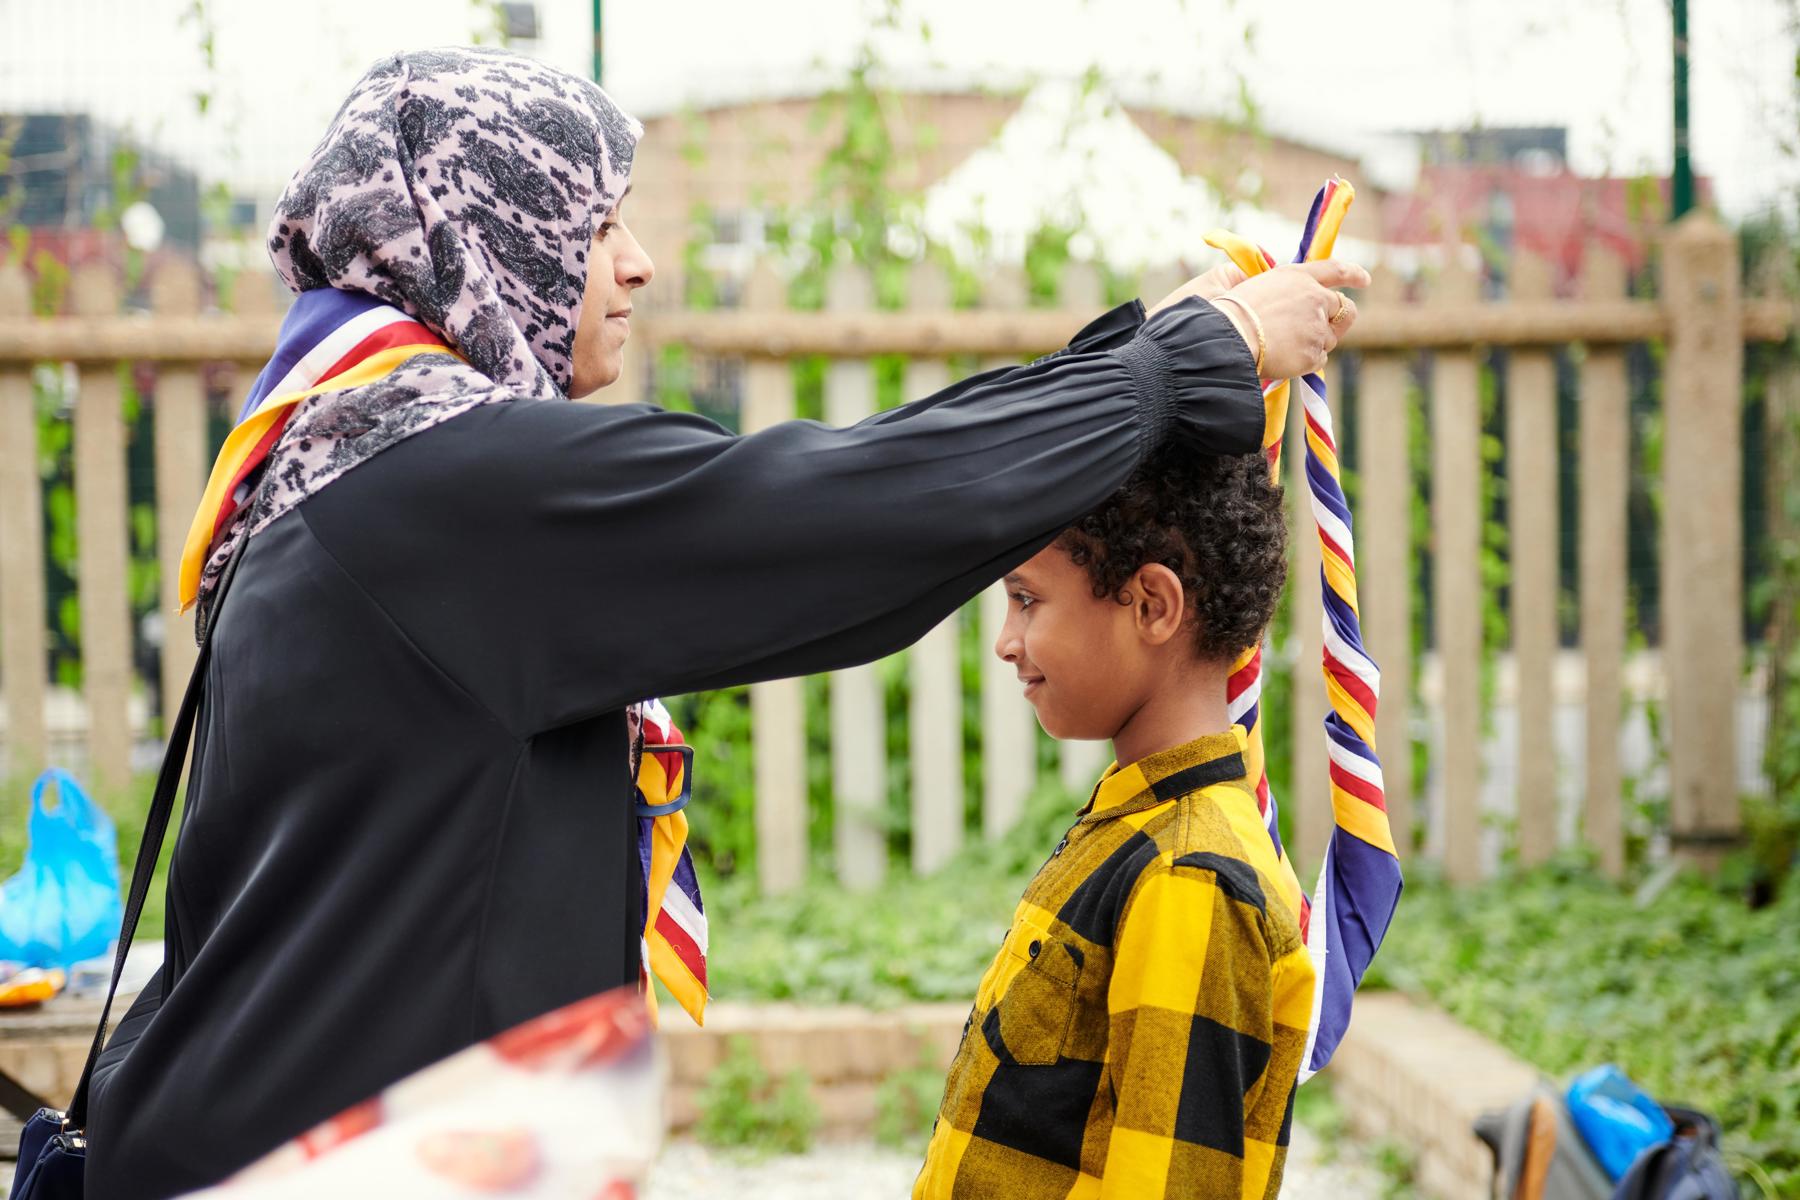 A volunteer places a yellow, red, blue and white necker around the neck of a young person.